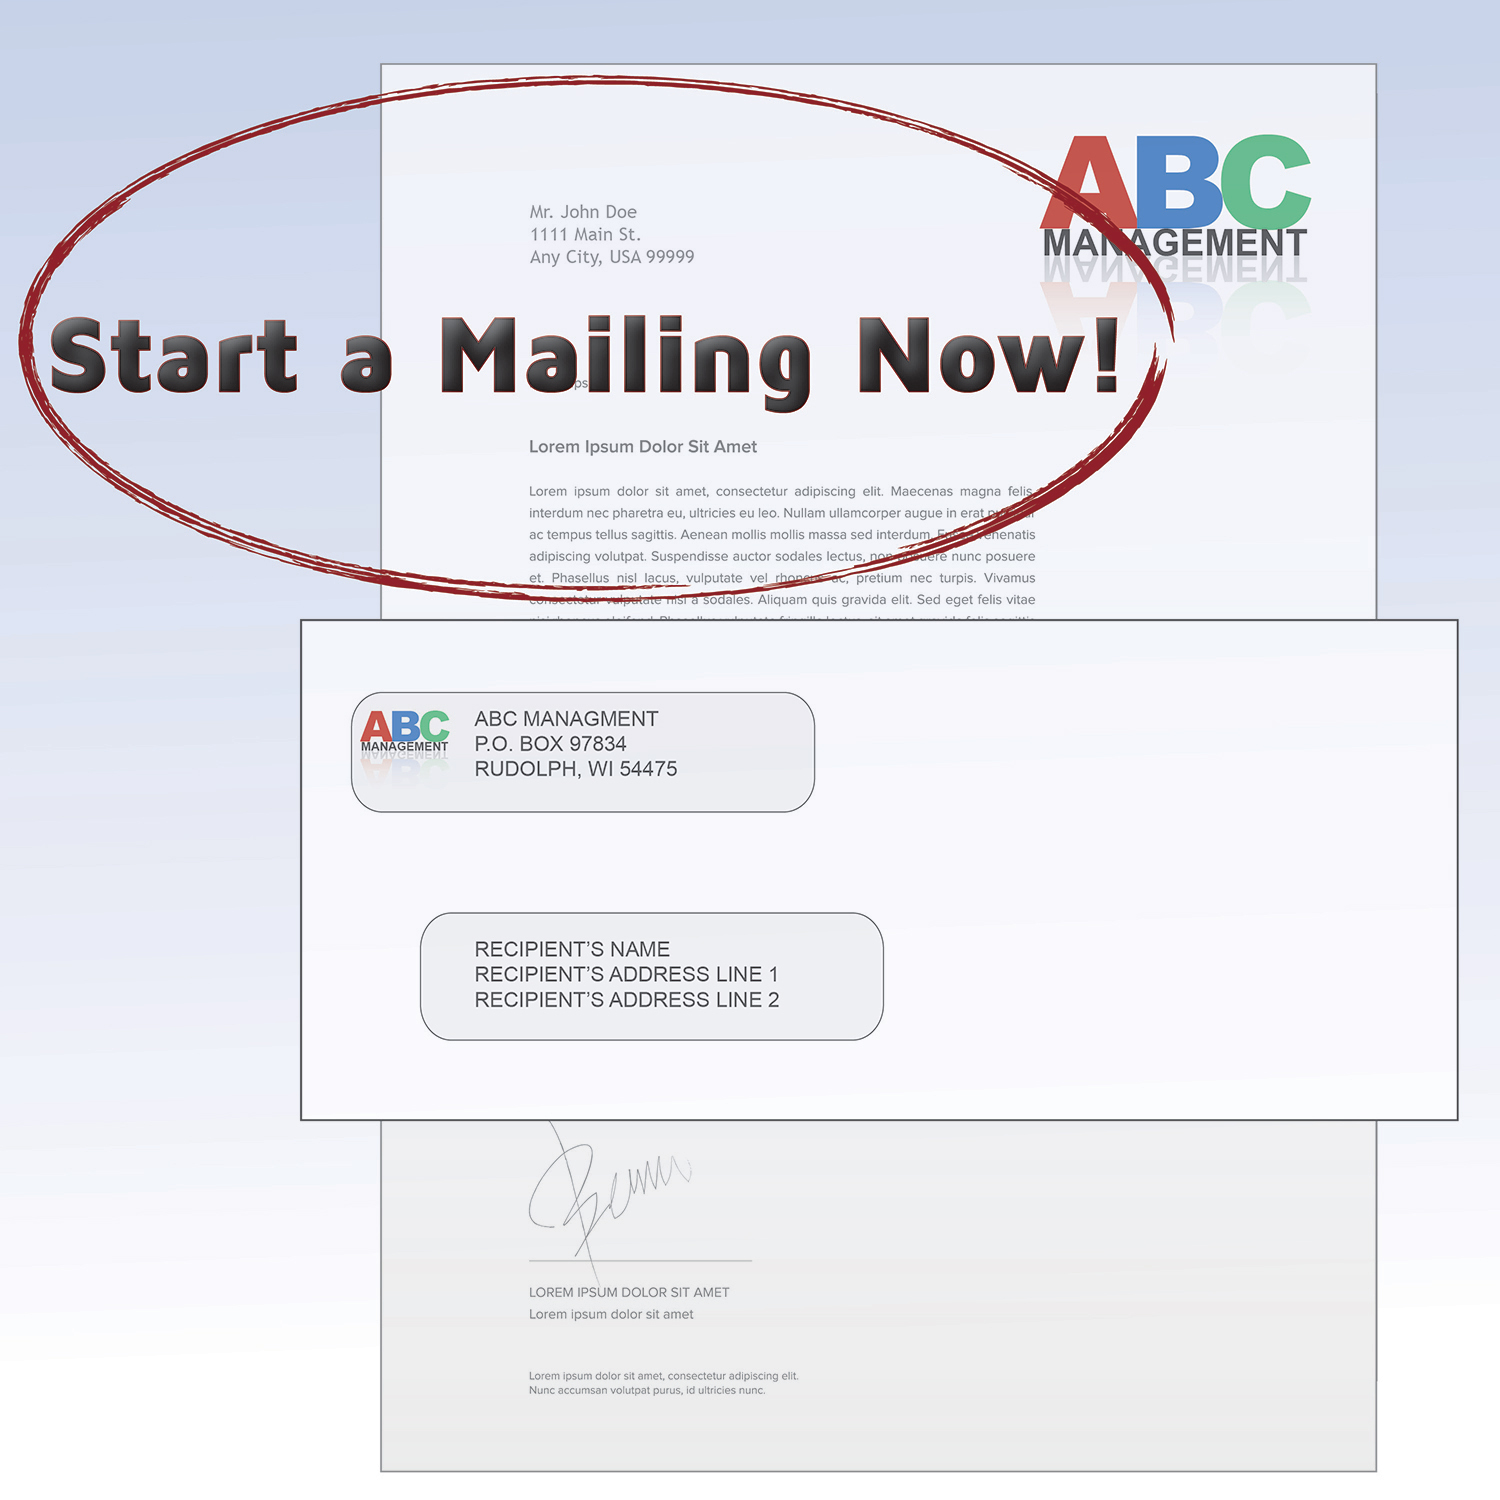 we allow you to mail personalized letters, newsletters, flyers, and more with ease